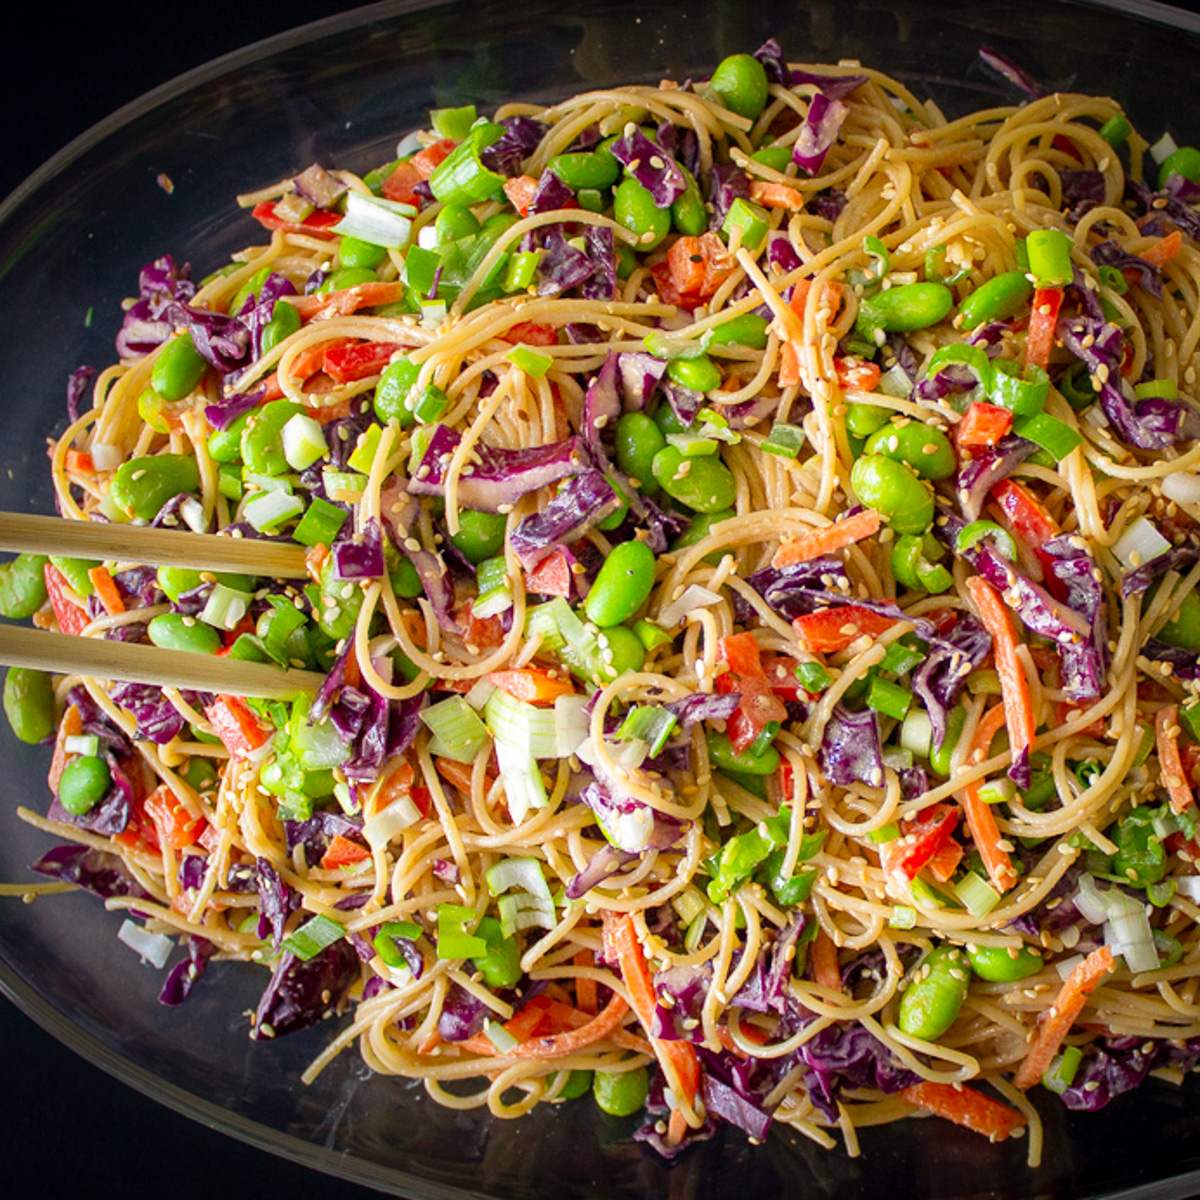 Spicy Peanut Noodles With Vegetables